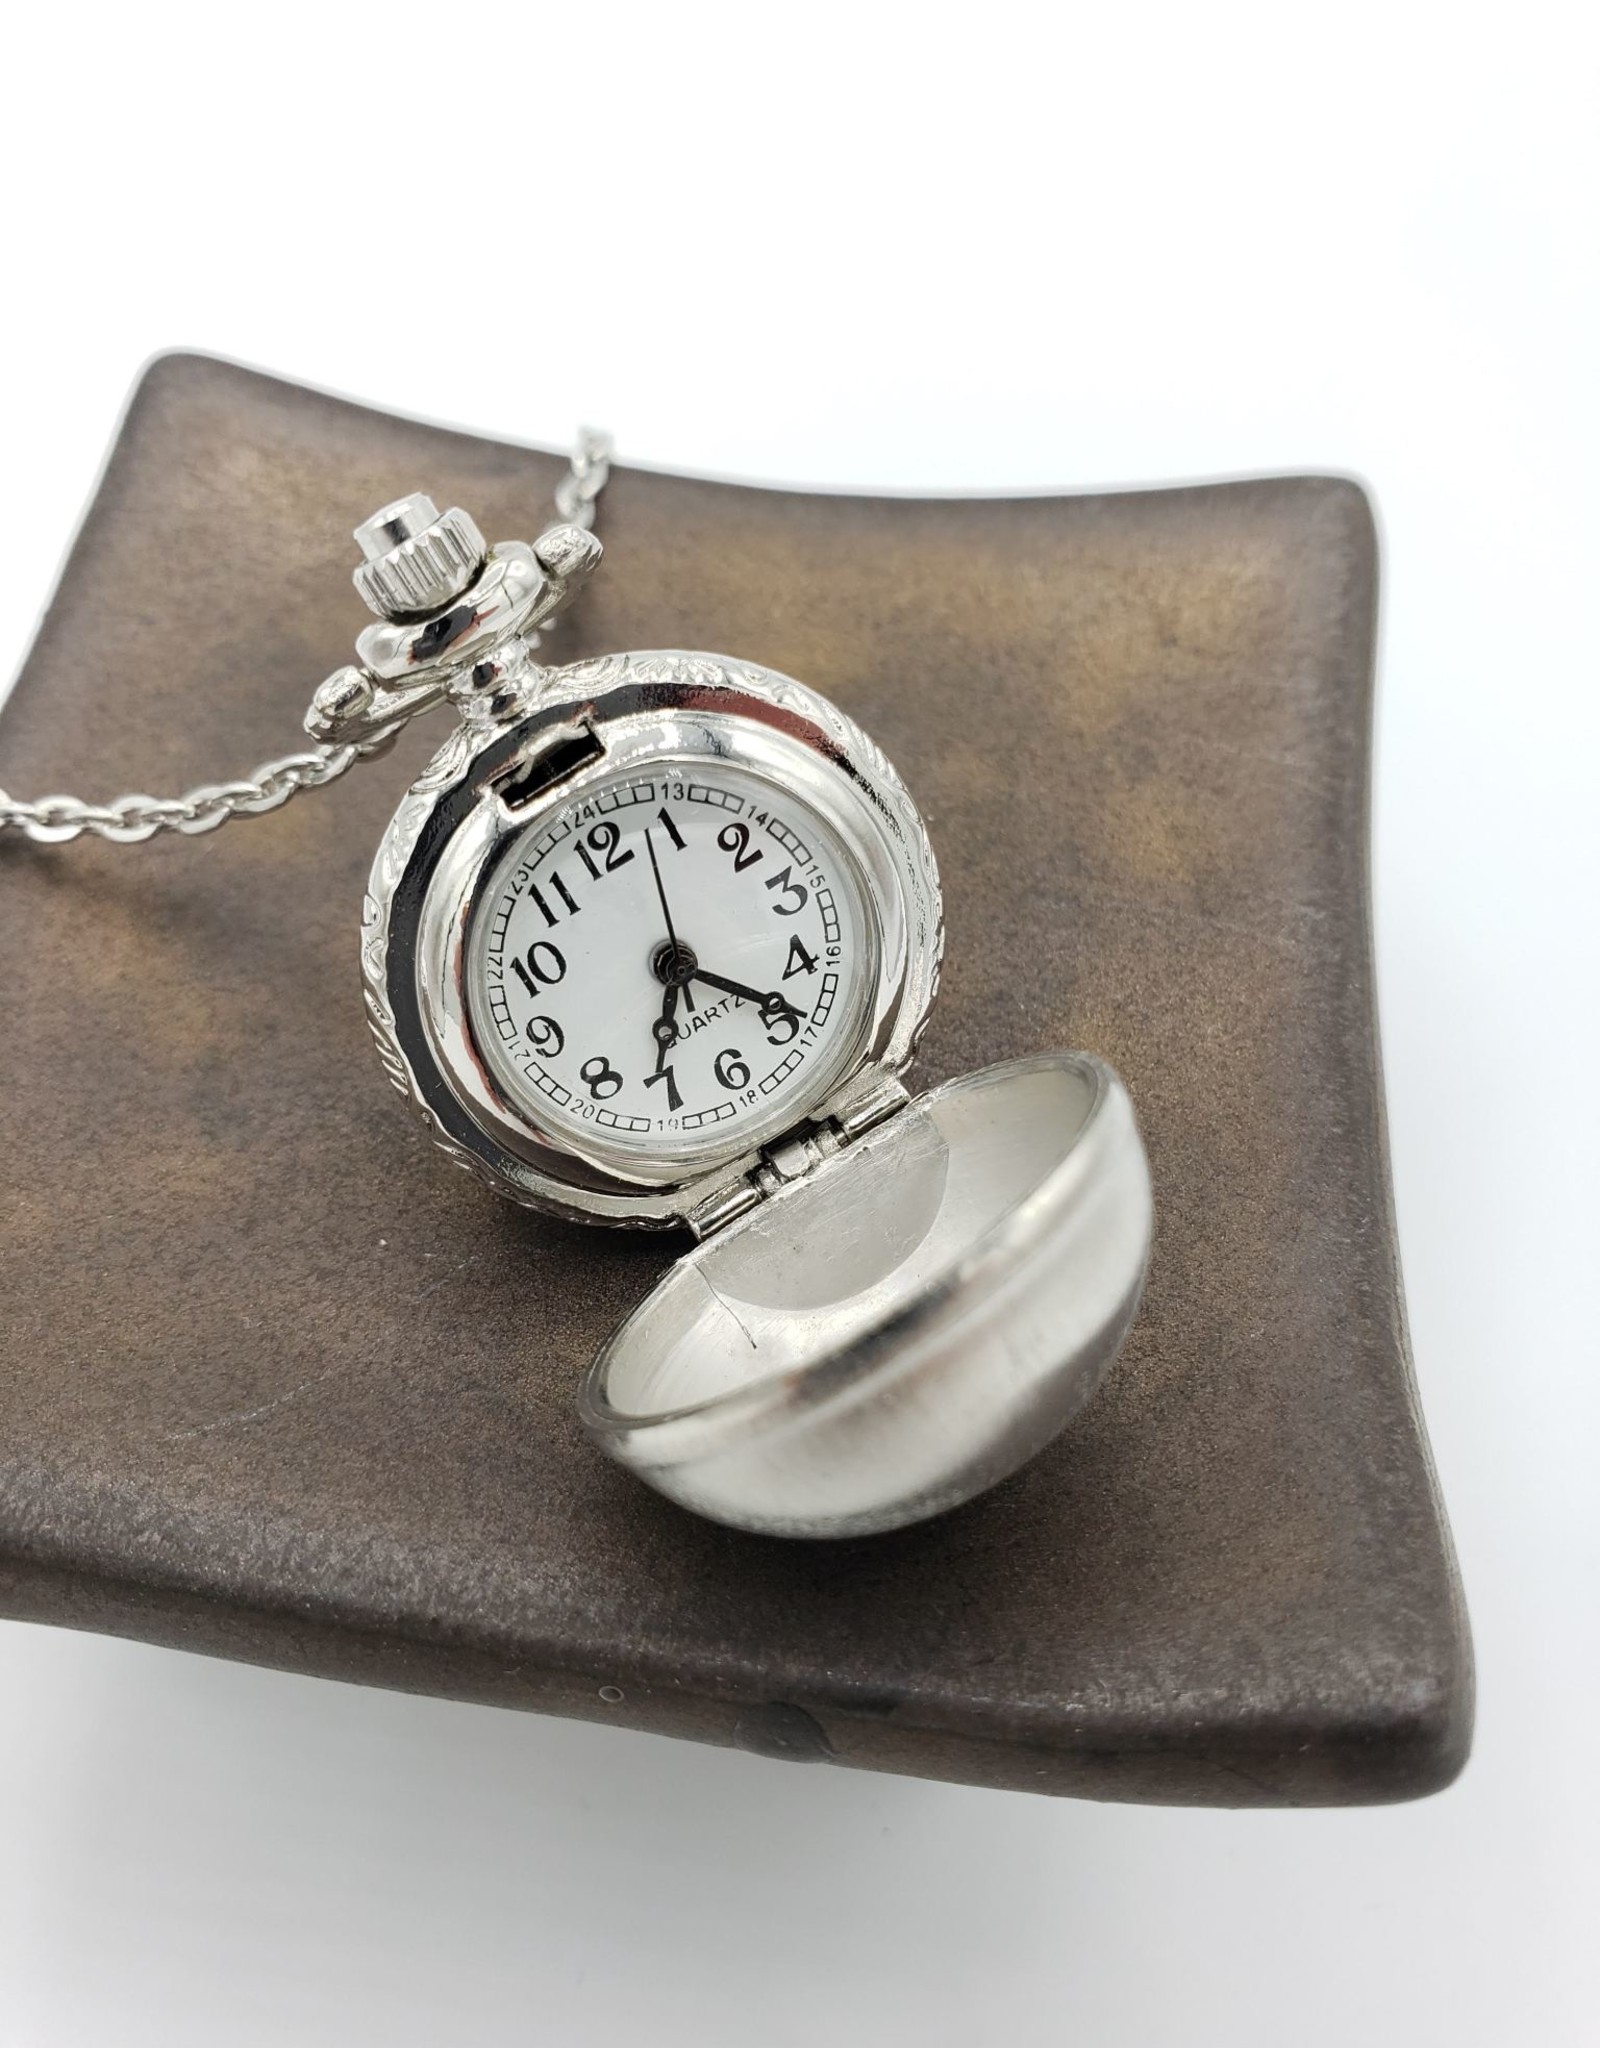 Spherical Pendant Watch Necklace, Brushed Silver tone